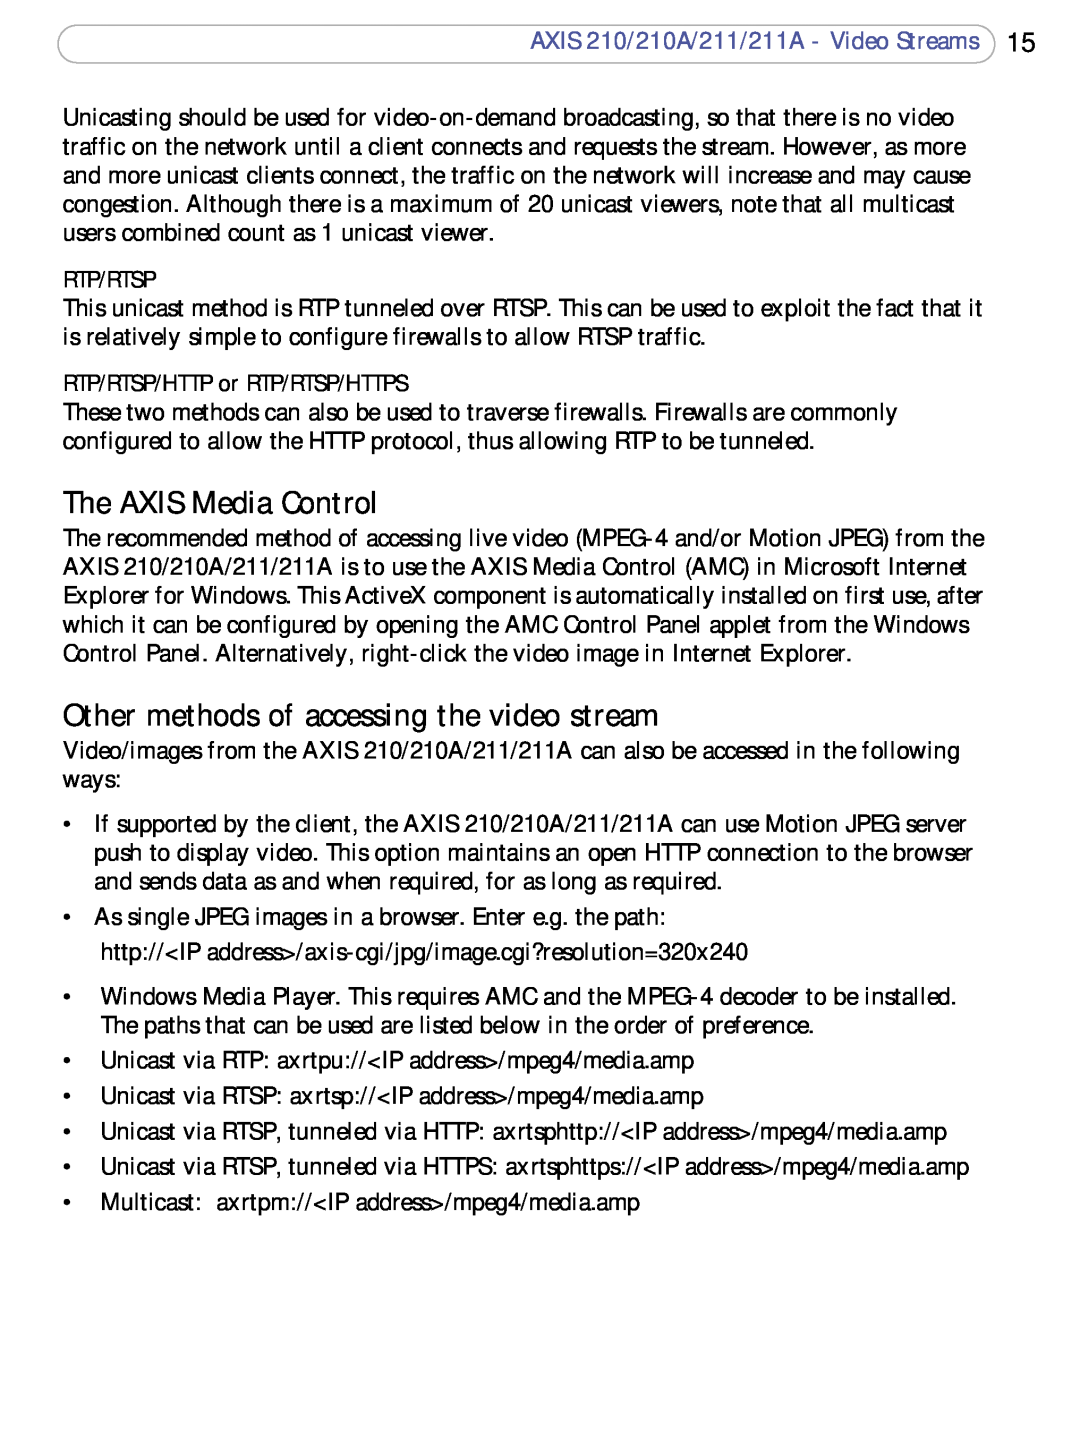 Axis Communications 210A, 211a user manual The AXIS Media Control, Other methods of accessing the video stream, Rtp/Rtsp 